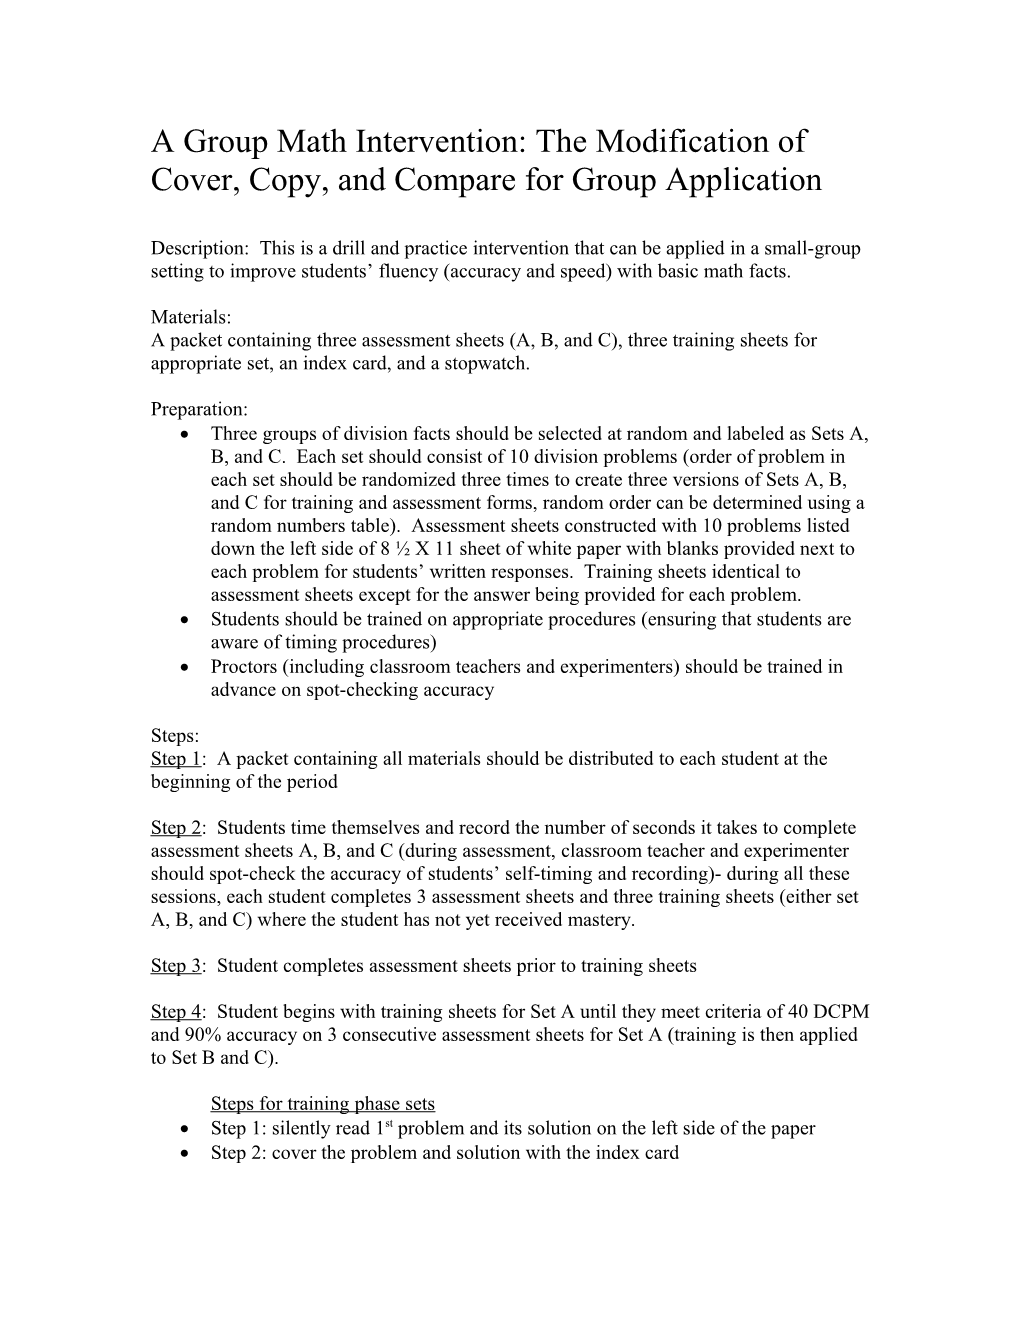 A Group Math Intervention: the Modification of Cover, Copy, and Compare for Group Application